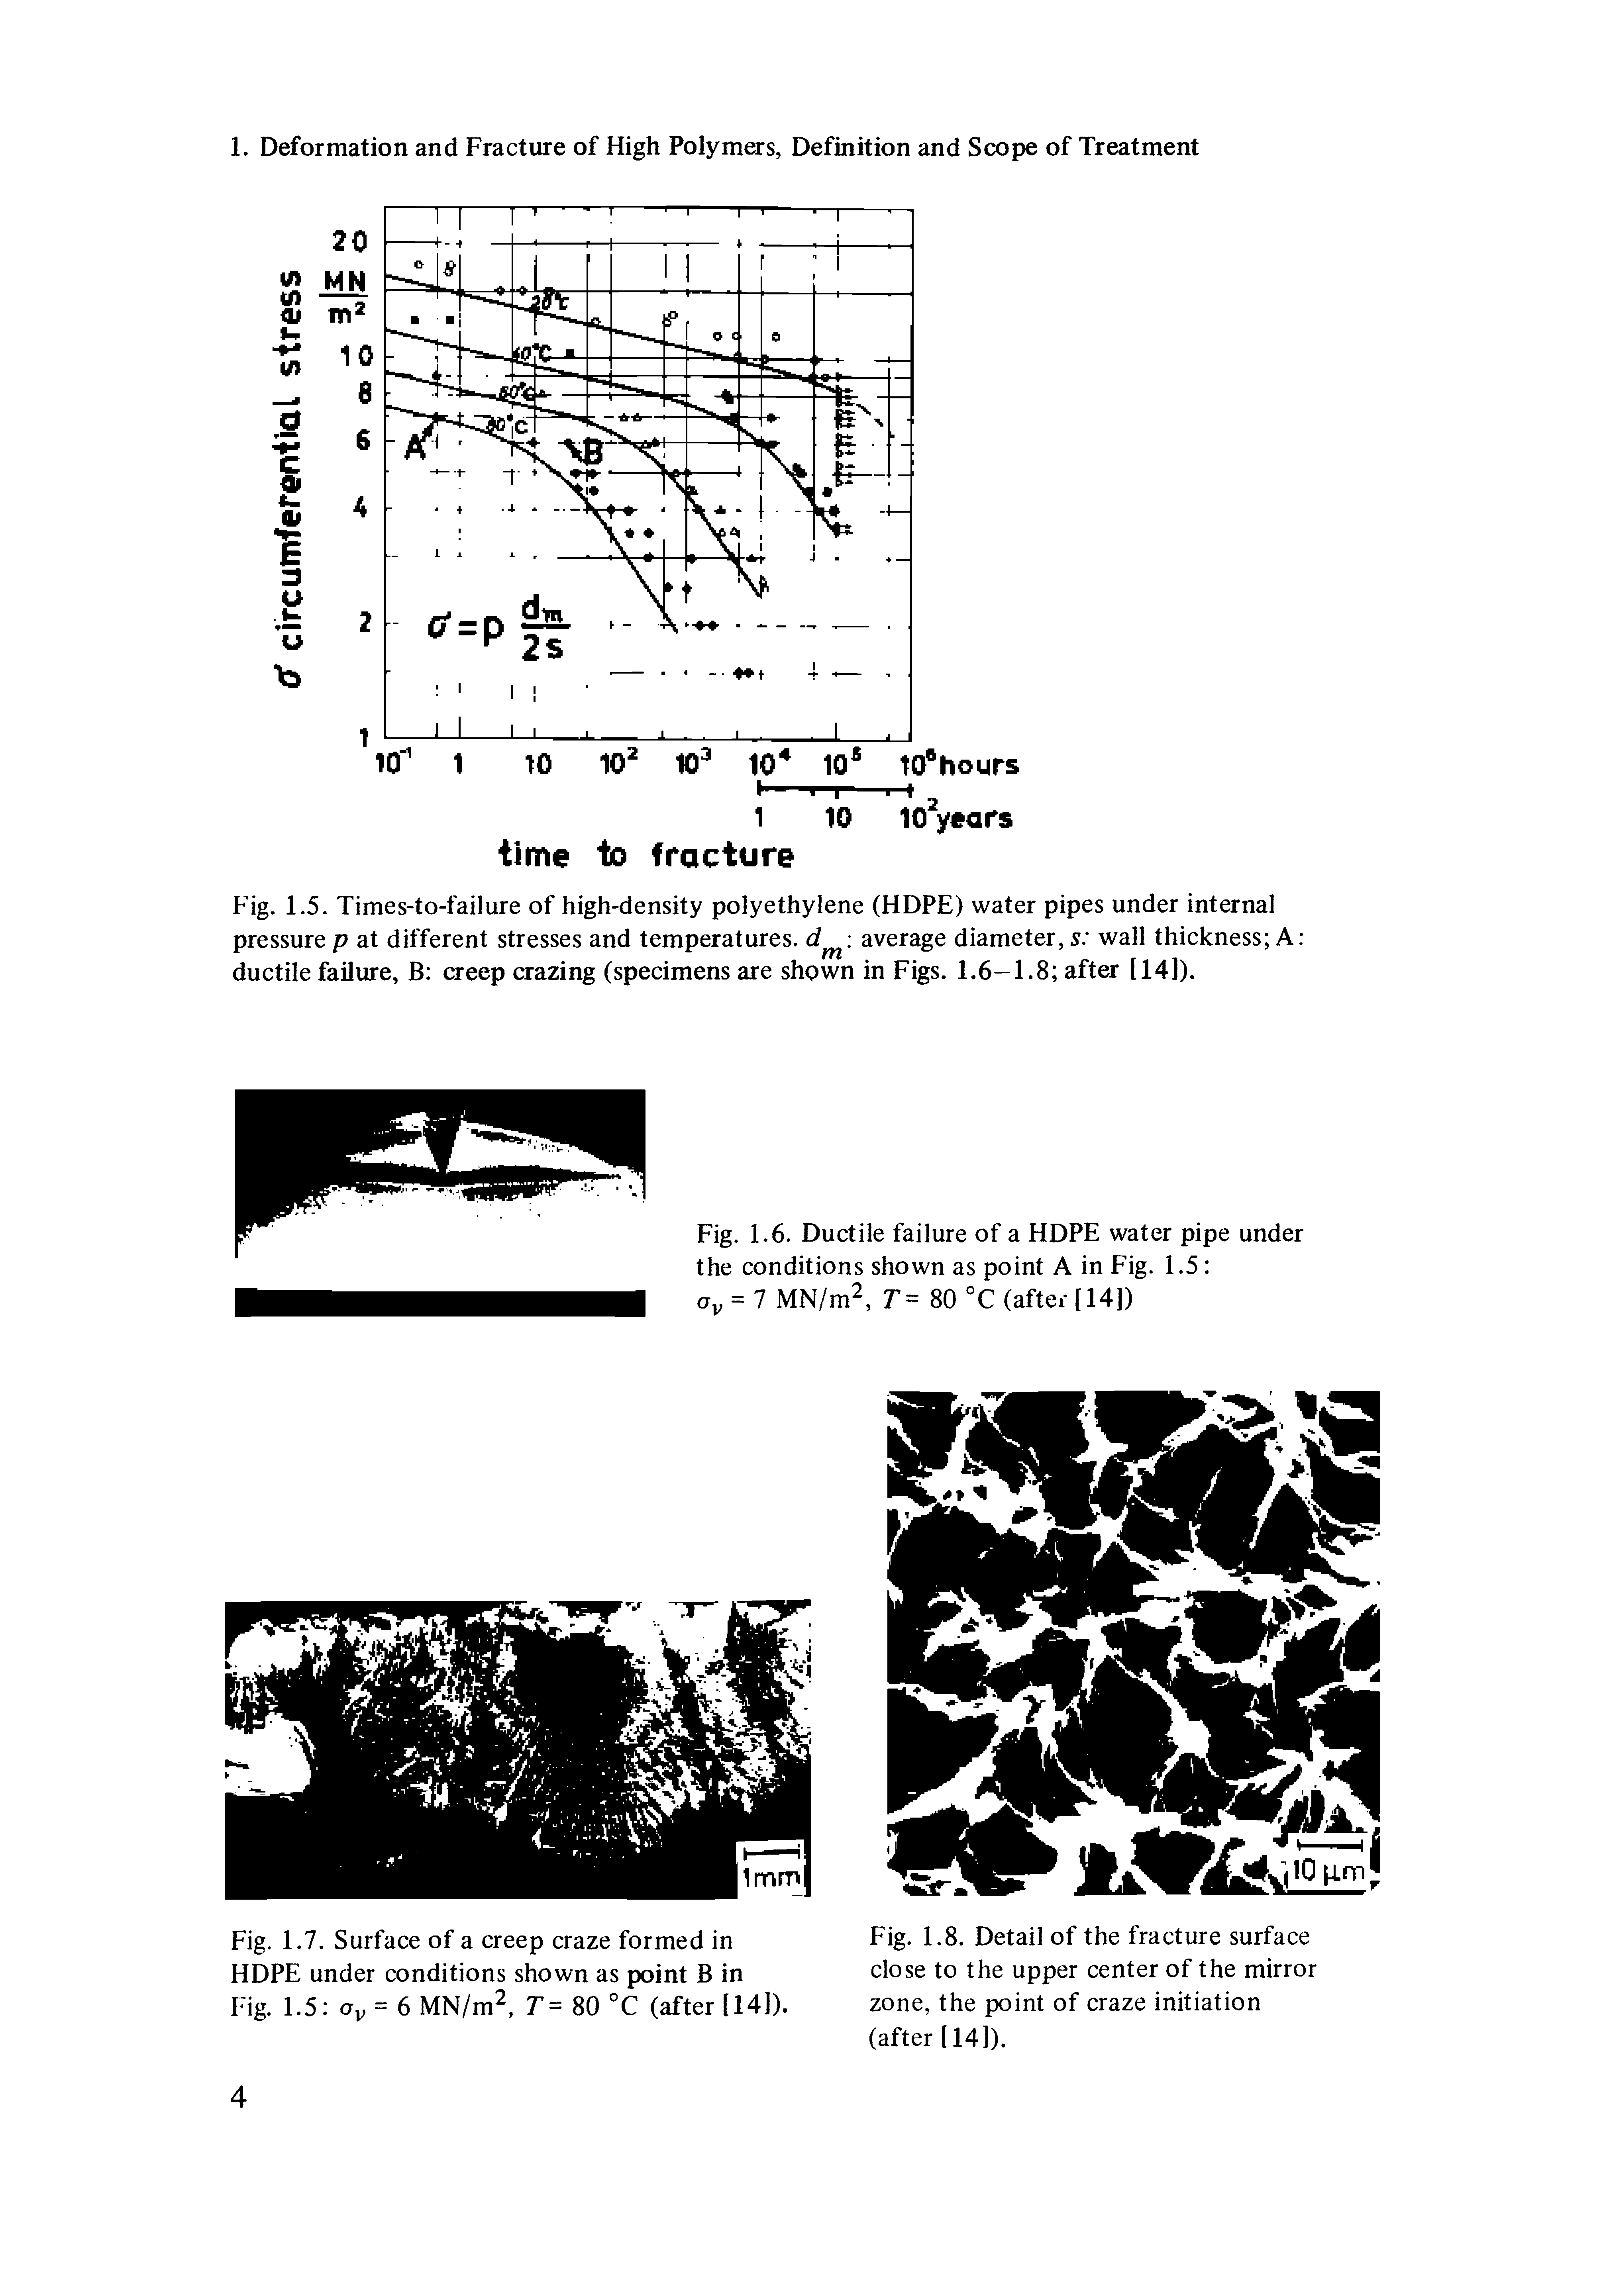 Fig. 1.5. Times-to-failure of high-density polyethylene (HDPE) water pipes under internal pressure p at different stresses and temperatures, d average diameter, s wall thickness A ductile failure, B creep crazing (specimens are shown in Figs. 1.6—1.8 after 1141).